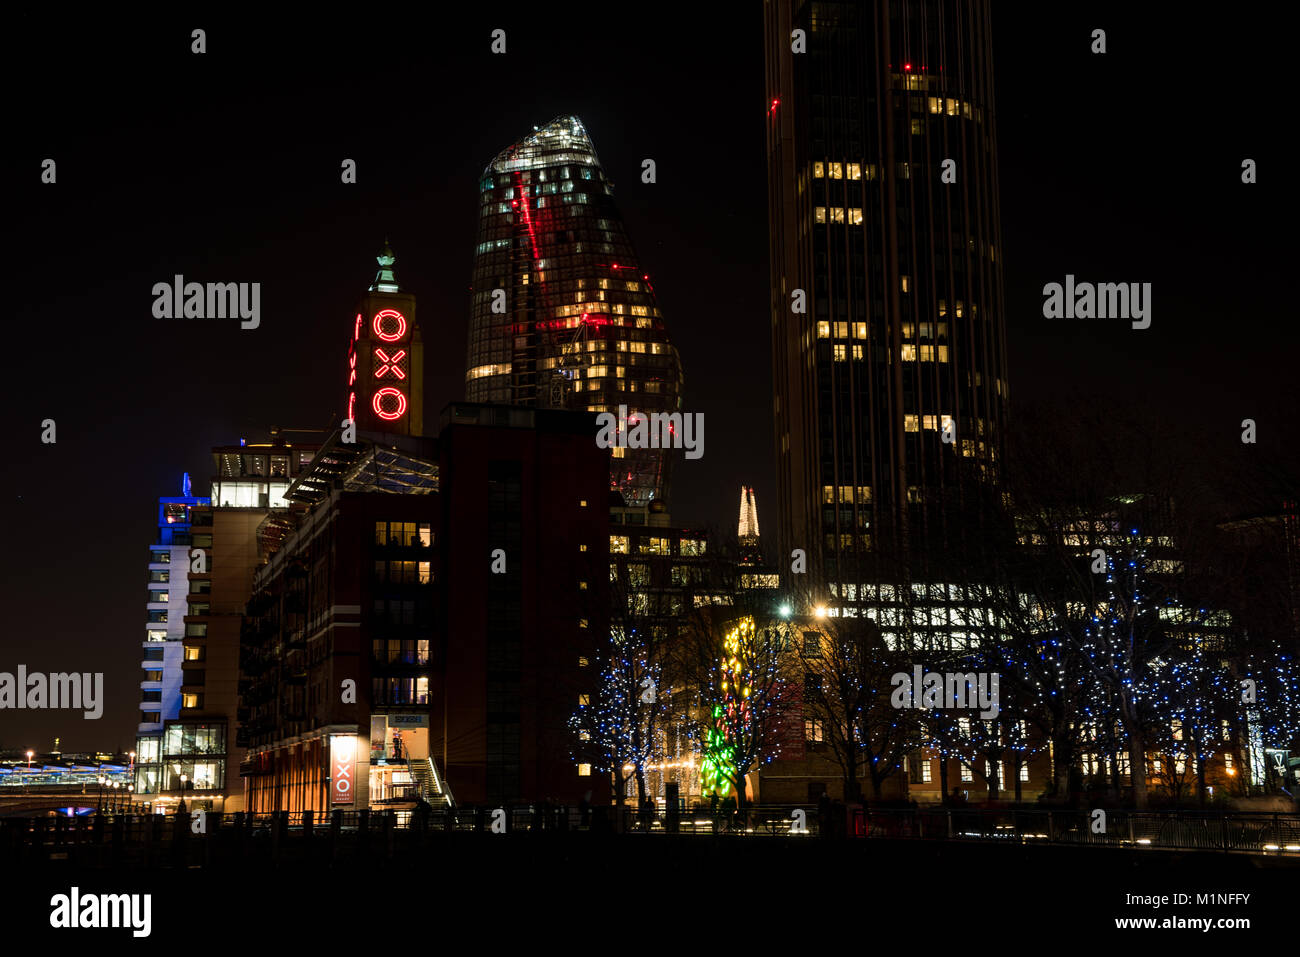 London OXO tower at night Stock Photo